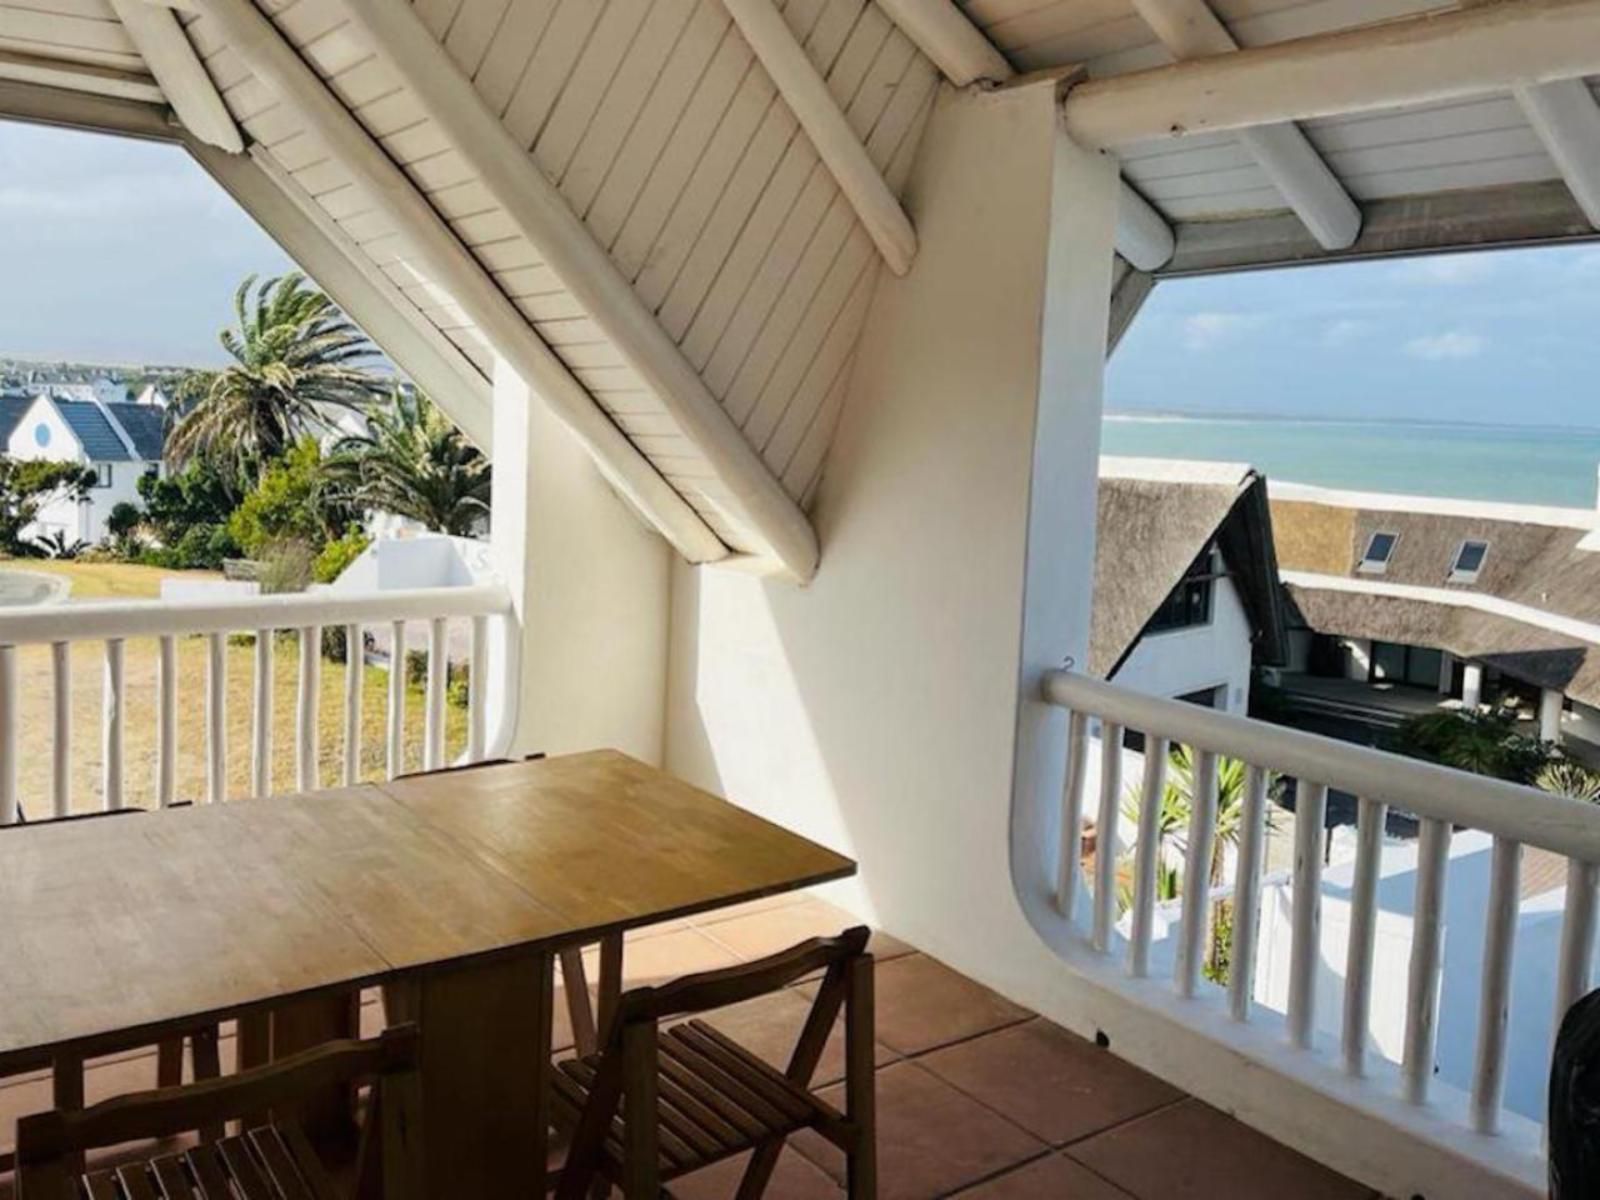 Summerhill Self Catering Accommodation St Francis Bay Eastern Cape South Africa Beach, Nature, Sand, Palm Tree, Plant, Wood